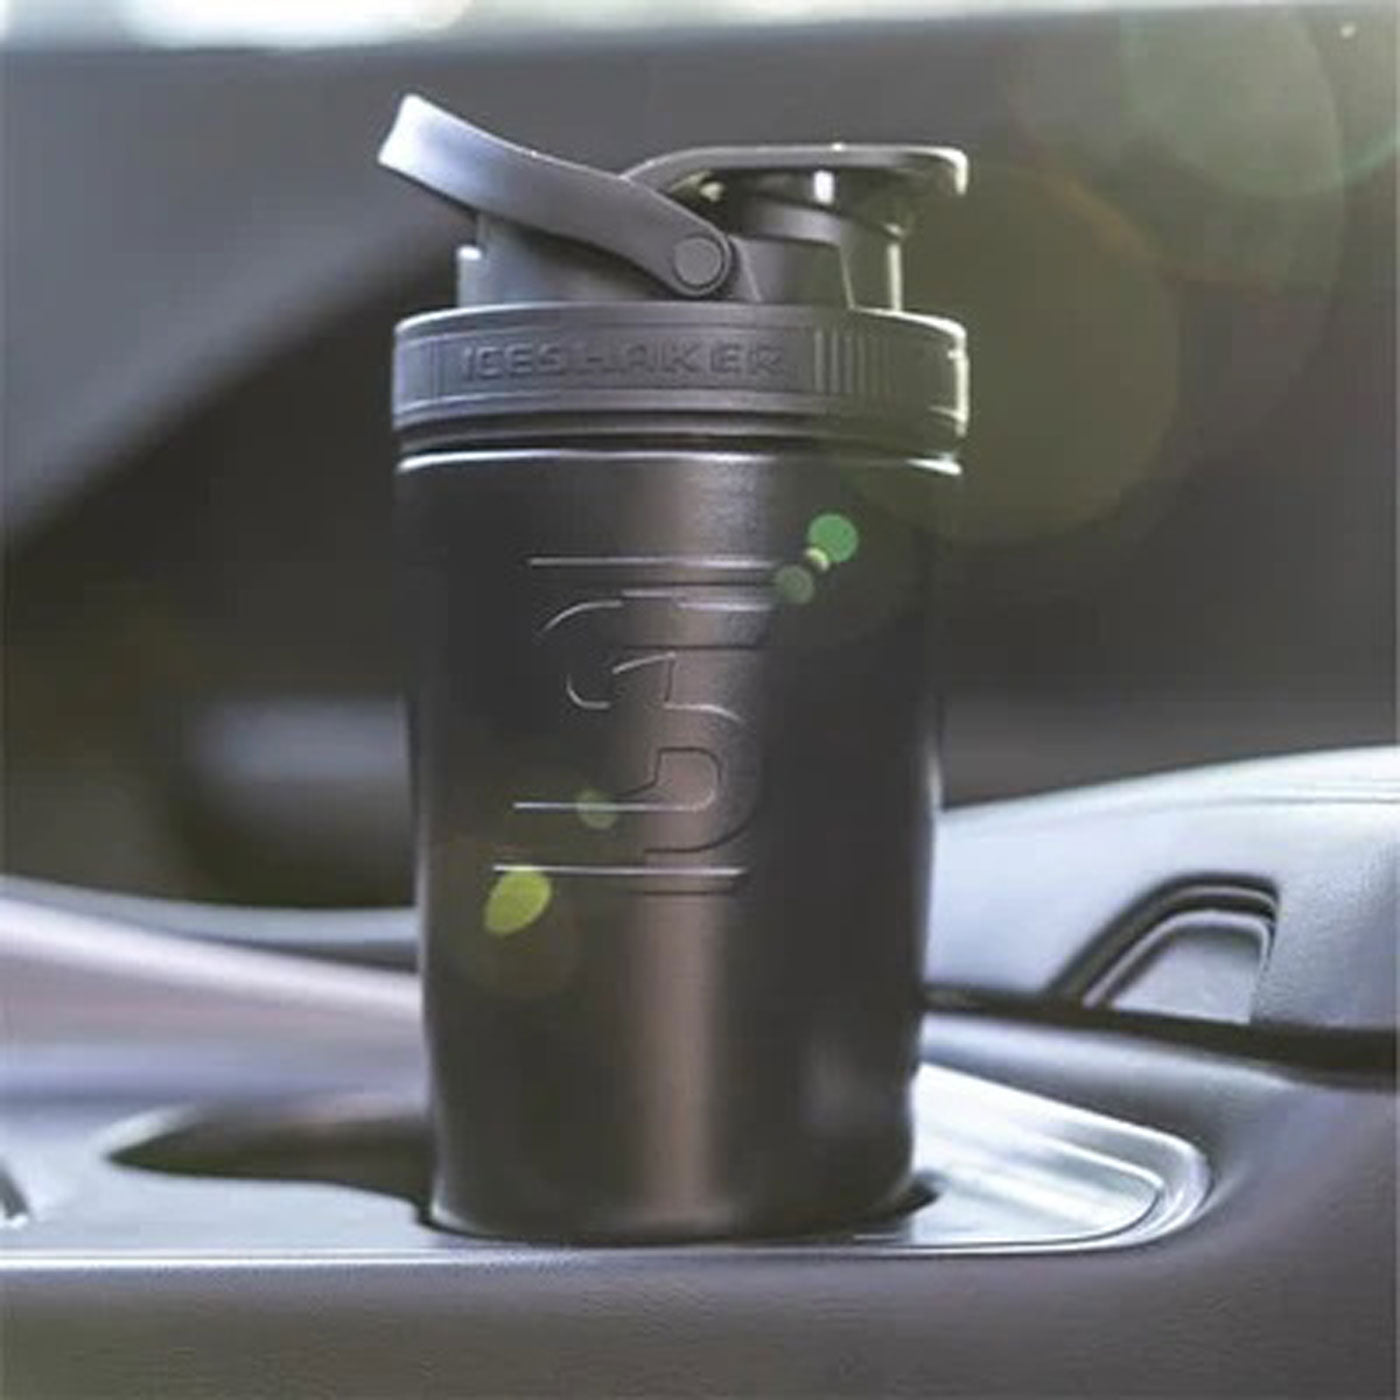 This image shows a Black 26oz Ice Shaker fitting easily into a car's cup holder.